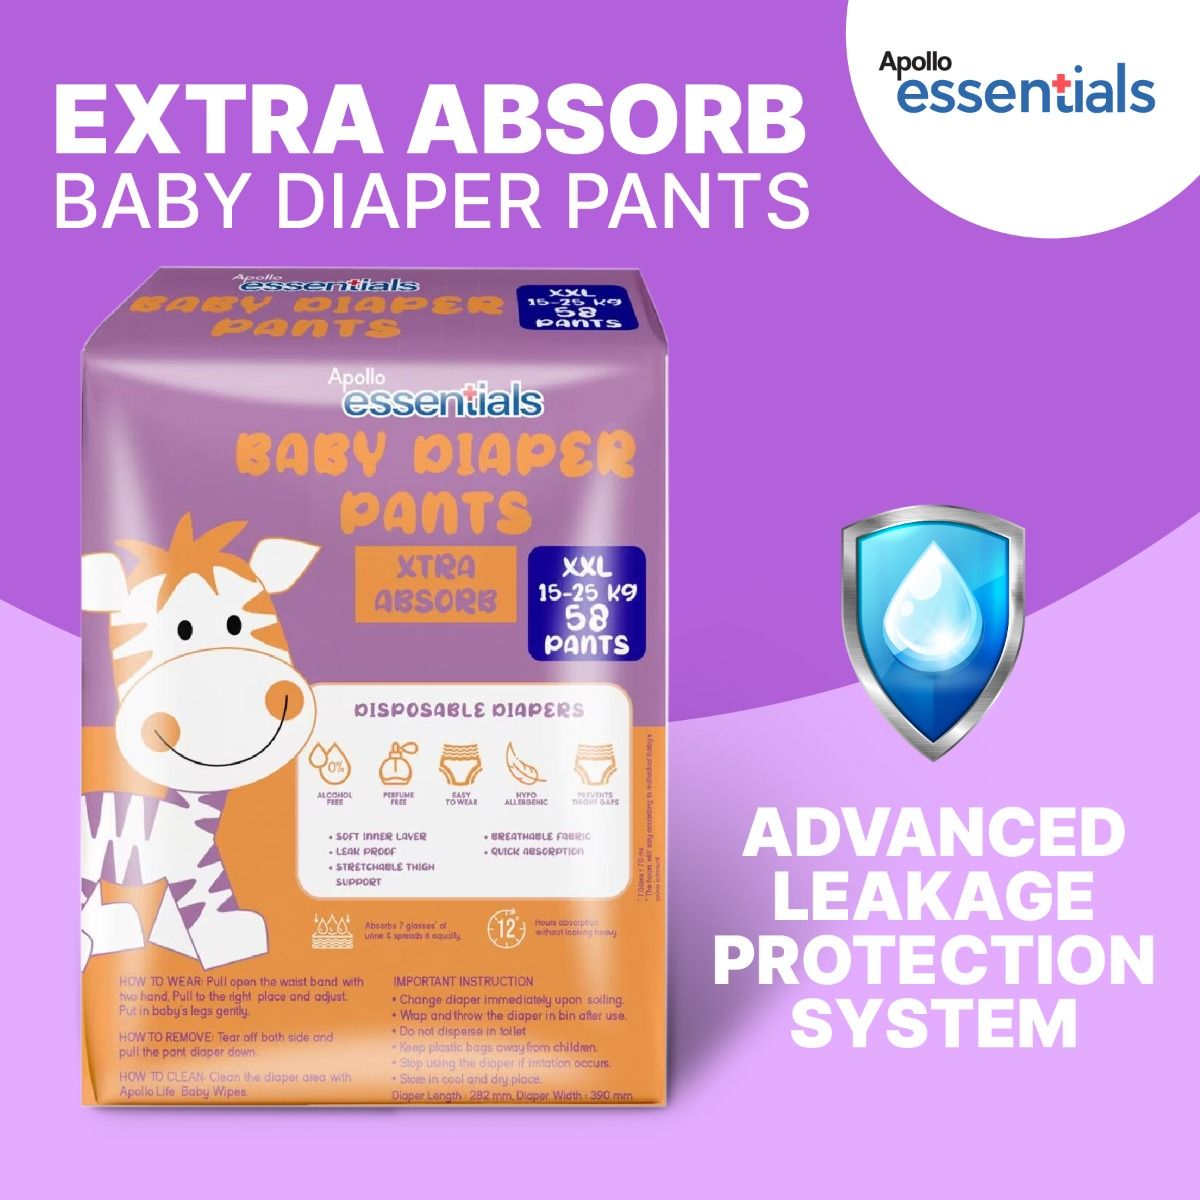 Apollo Essentials Extra Absorb Baby Diaper Pants XXL, 58 Count, Pack of 1 